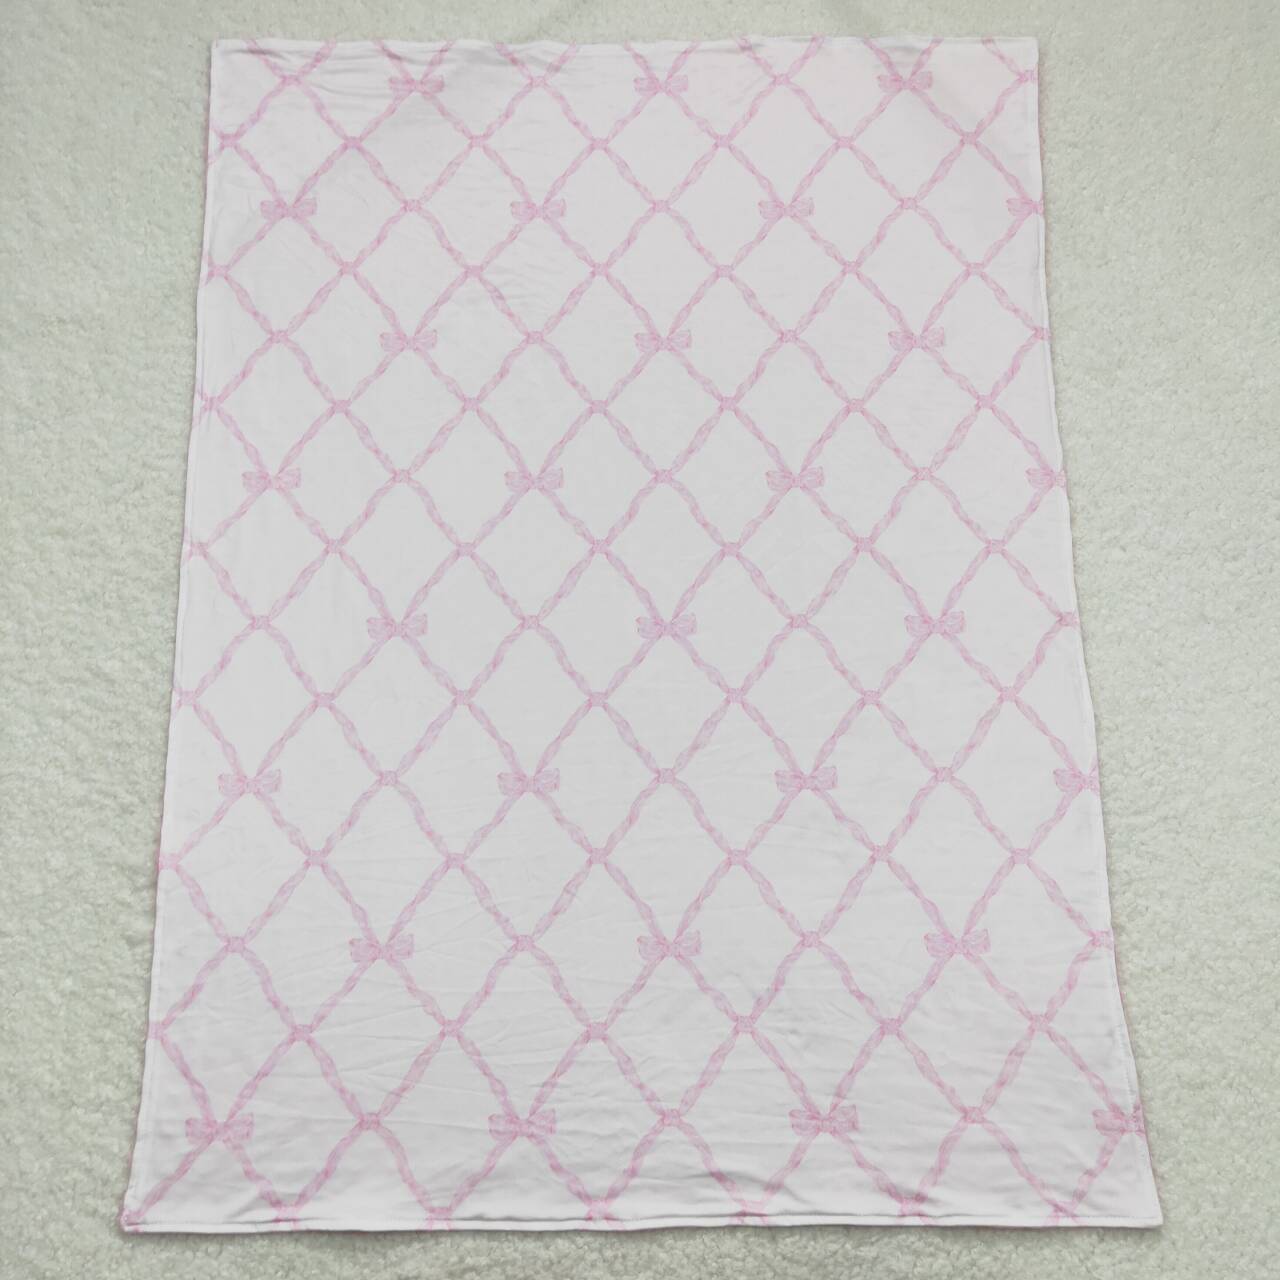 BL0132 Pink and white baby blanket with bow design